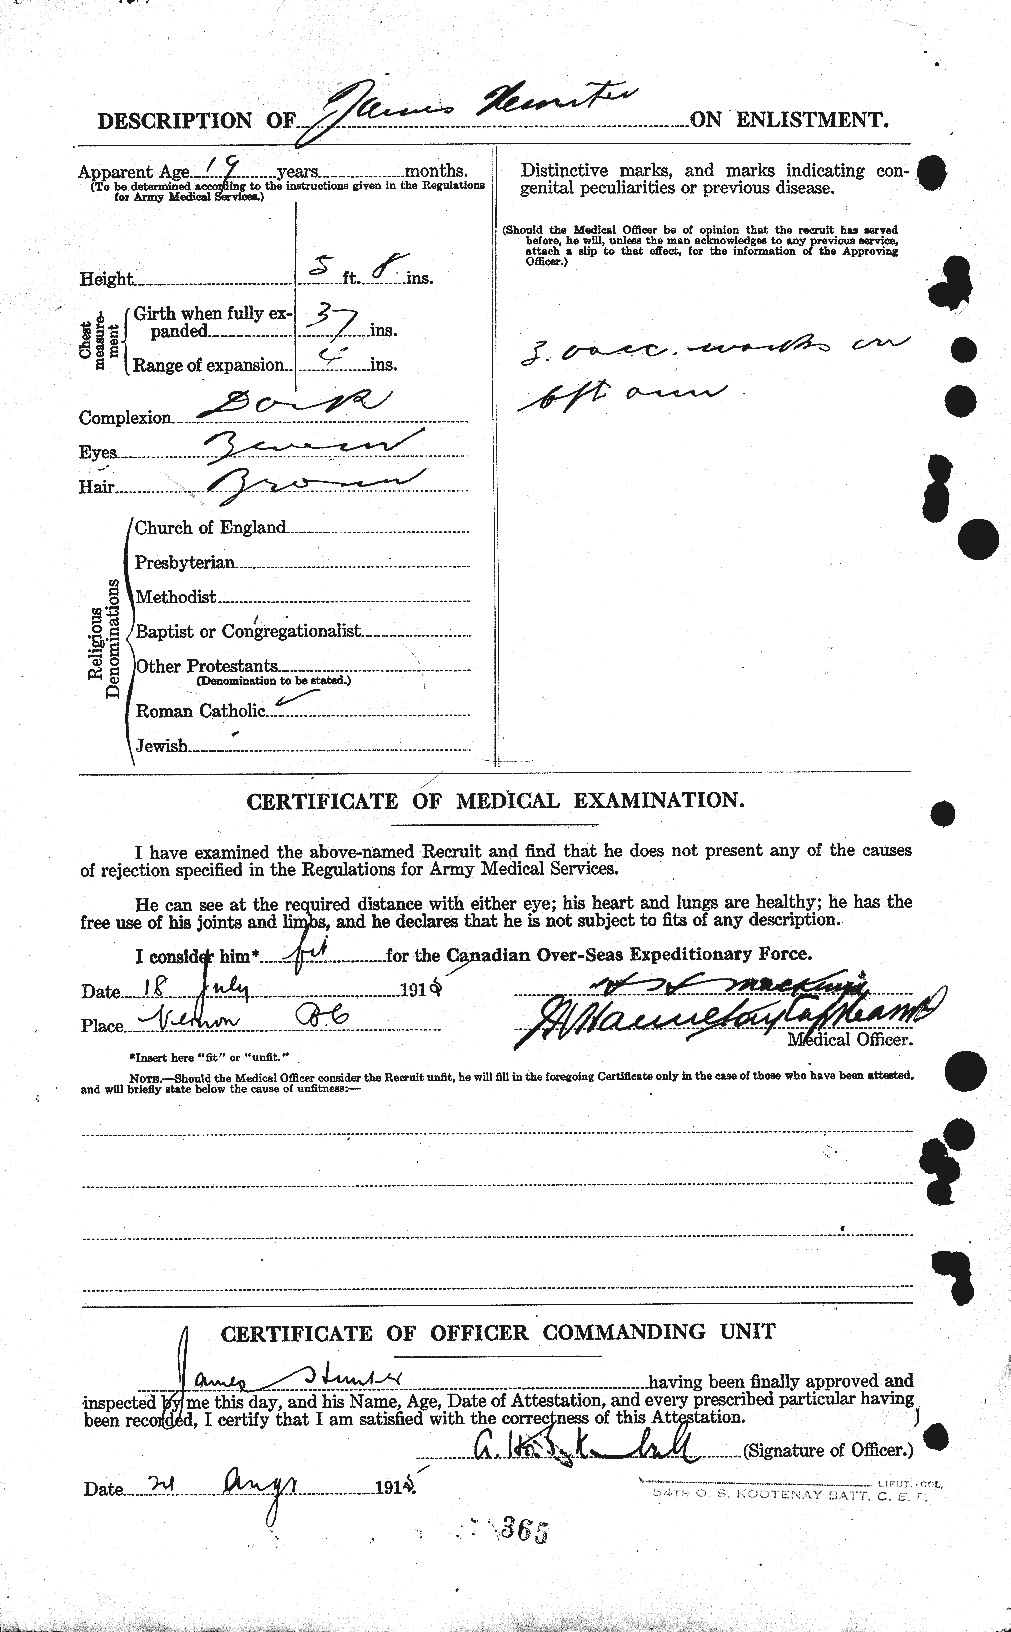 Personnel Records of the First World War - CEF 410280b